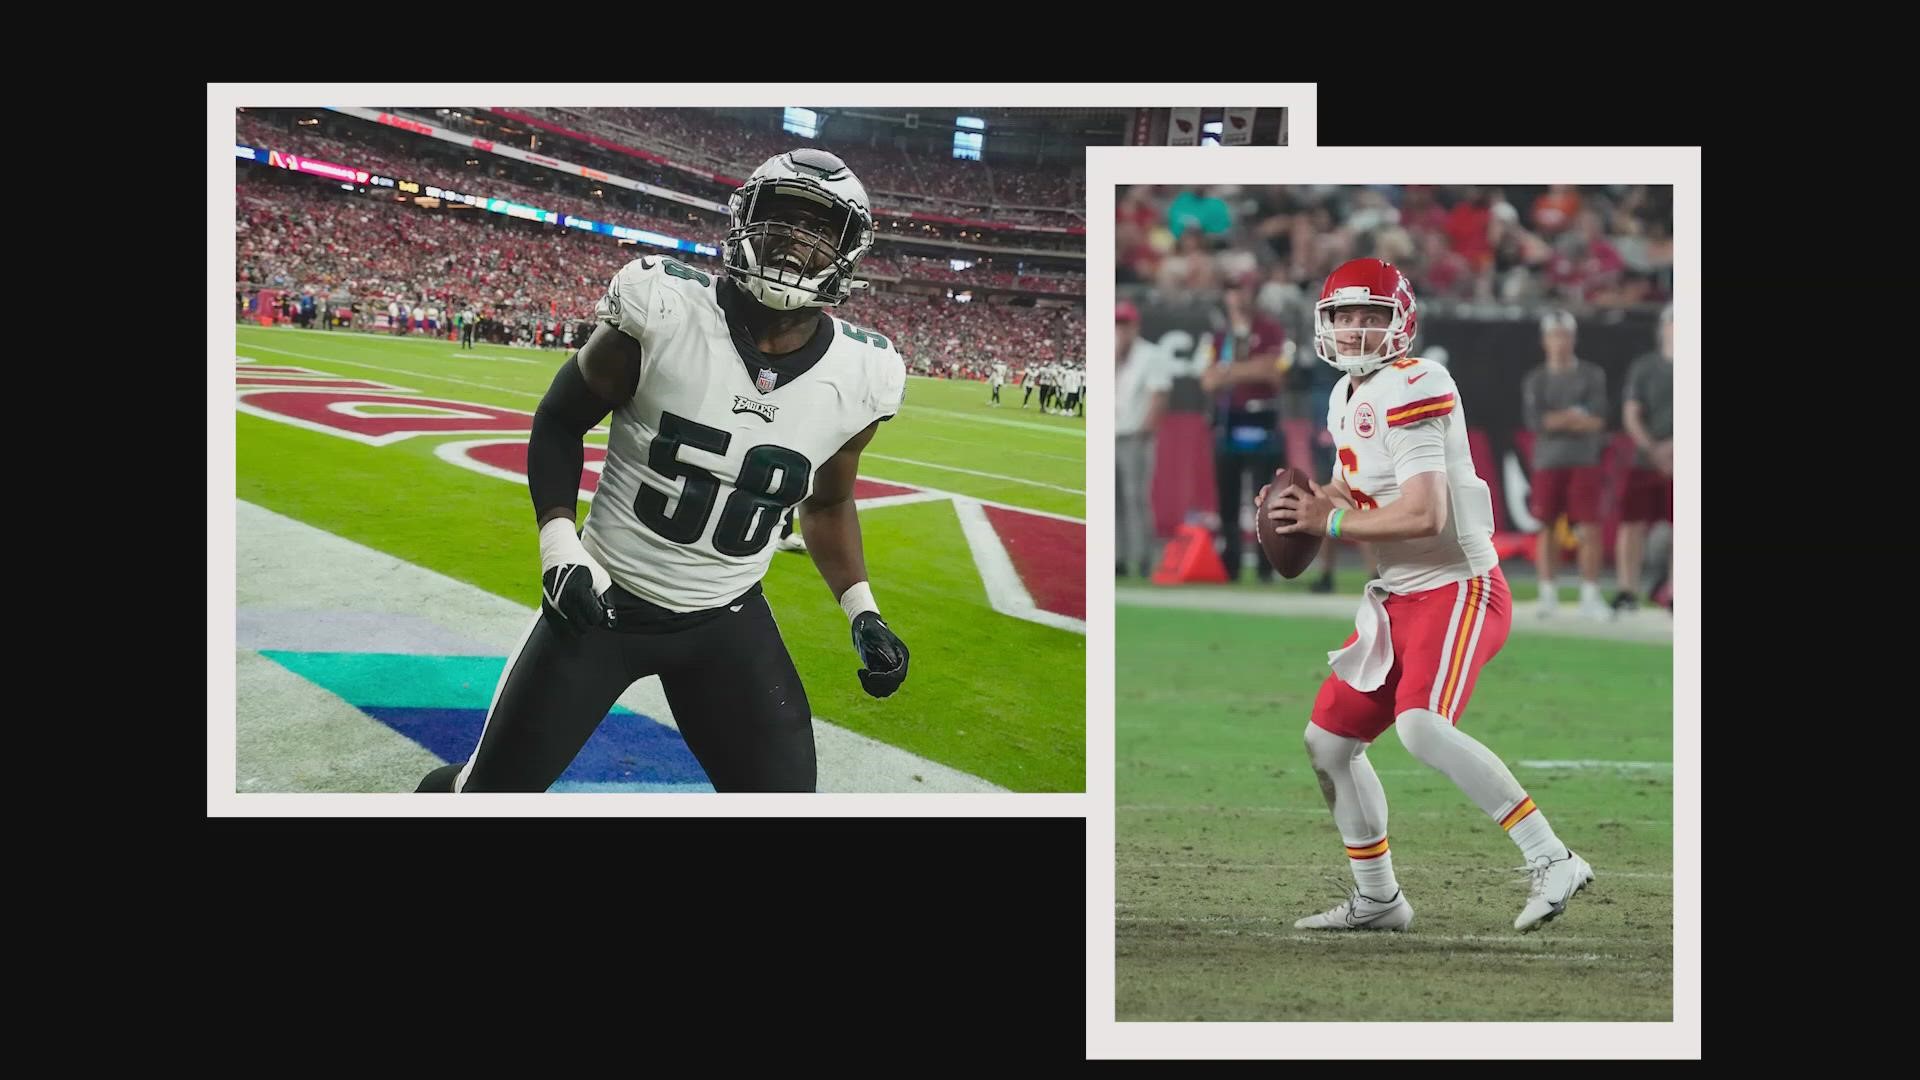 Shane Buechele is a backup quarterback for the Kansas City Chiefs. Linebacker Kyron Johnson is in his rookie season with the Philadelphia Eagles.